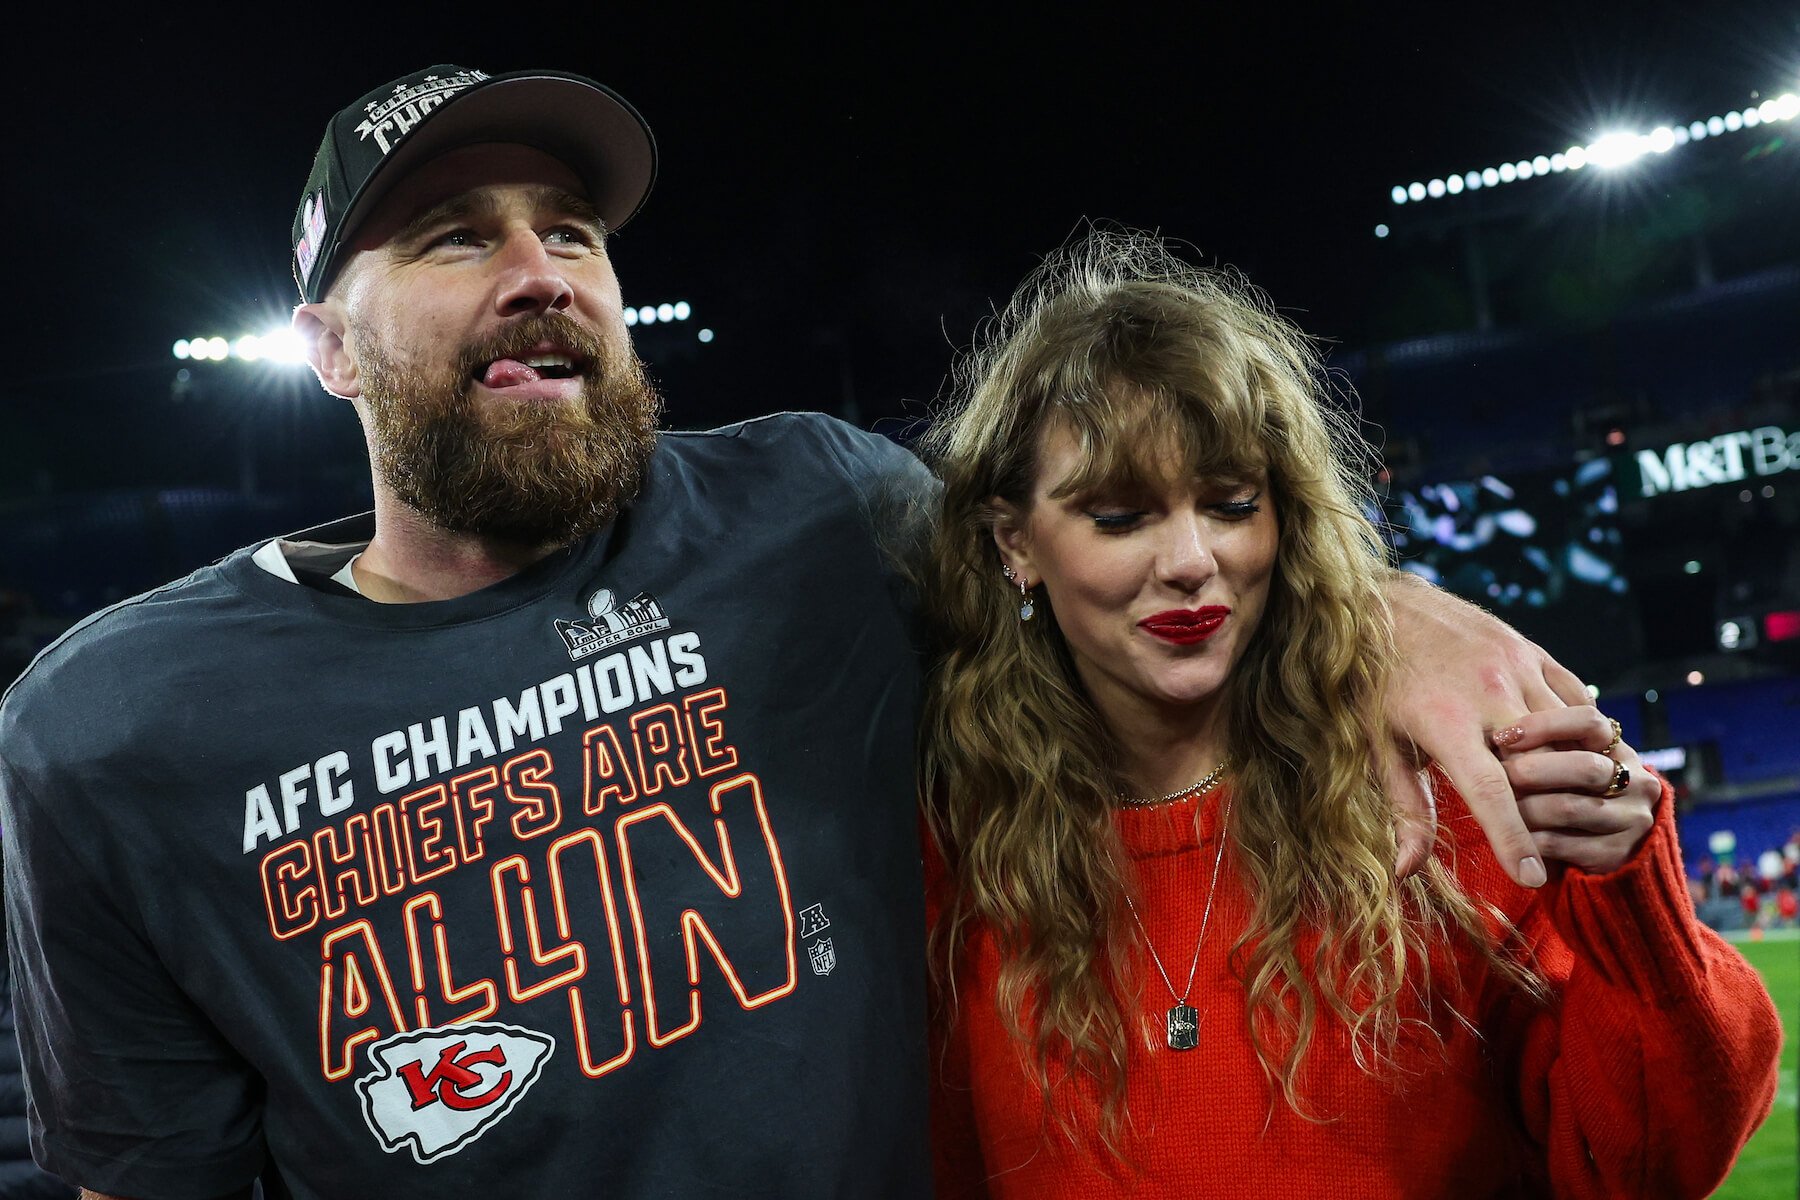 Travis Kelce with his arm around Taylor Swift after a football game with the Kansas City Chiefs